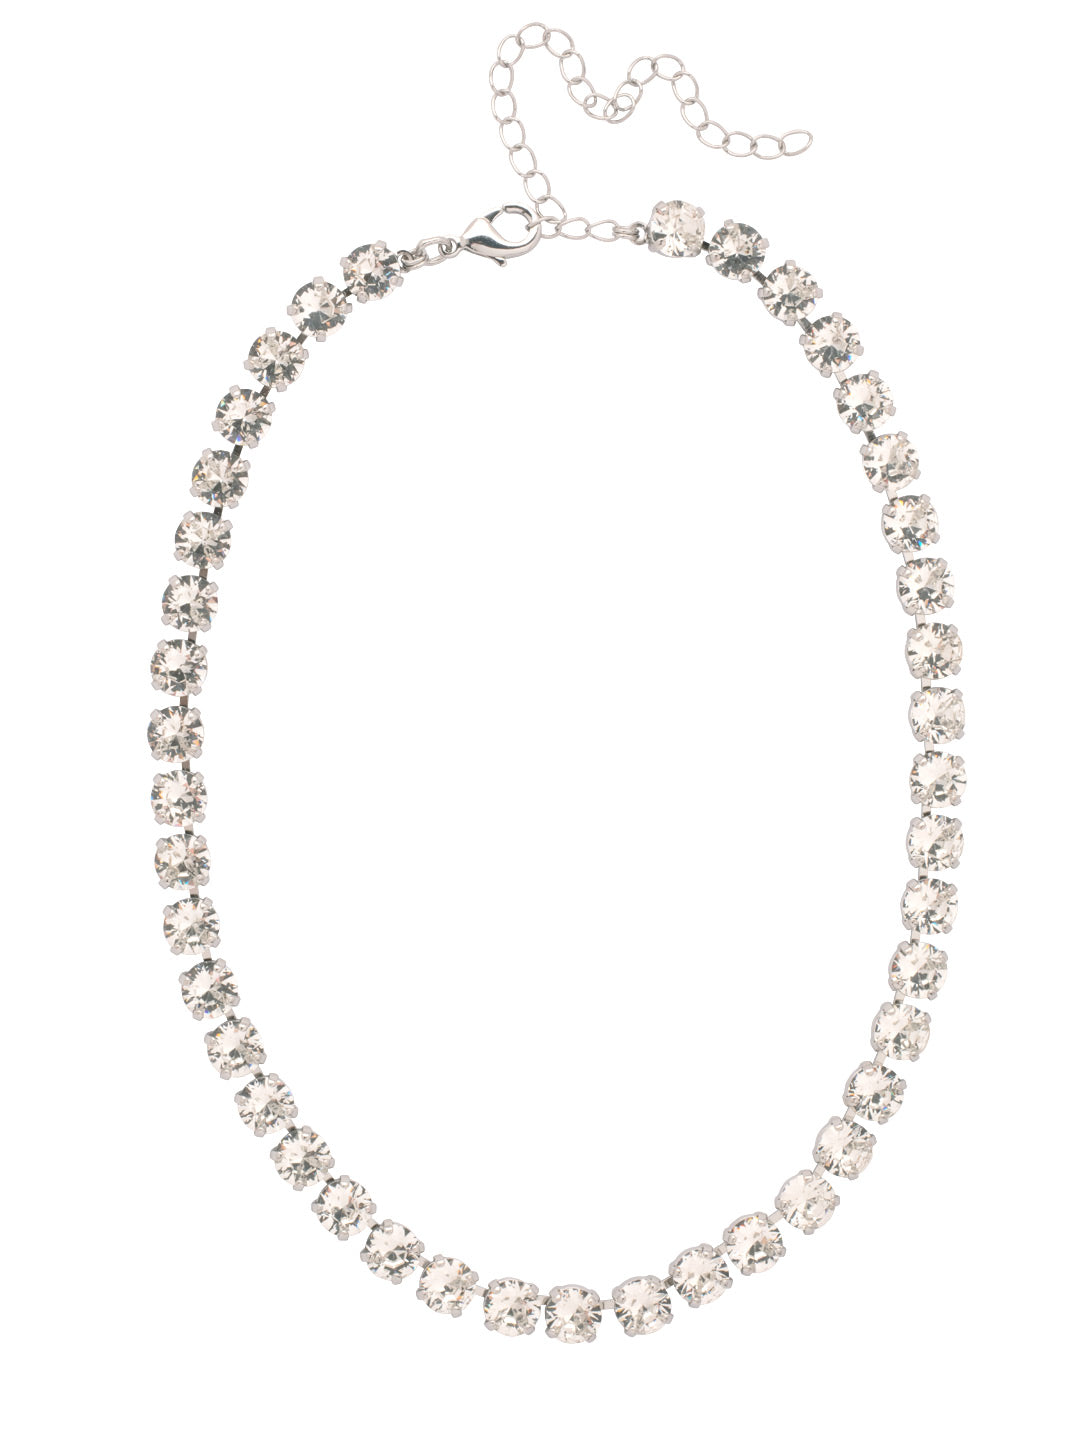 Matilda Tennis Necklace - NFJ4PDCRY - <p>The Matilda Tennis Necklace features a repeating line of round cut crystals on an adjustable chain, secured with a lobster claw clasp. From Sorrelli's Crystal collection in our Palladium finish.</p>